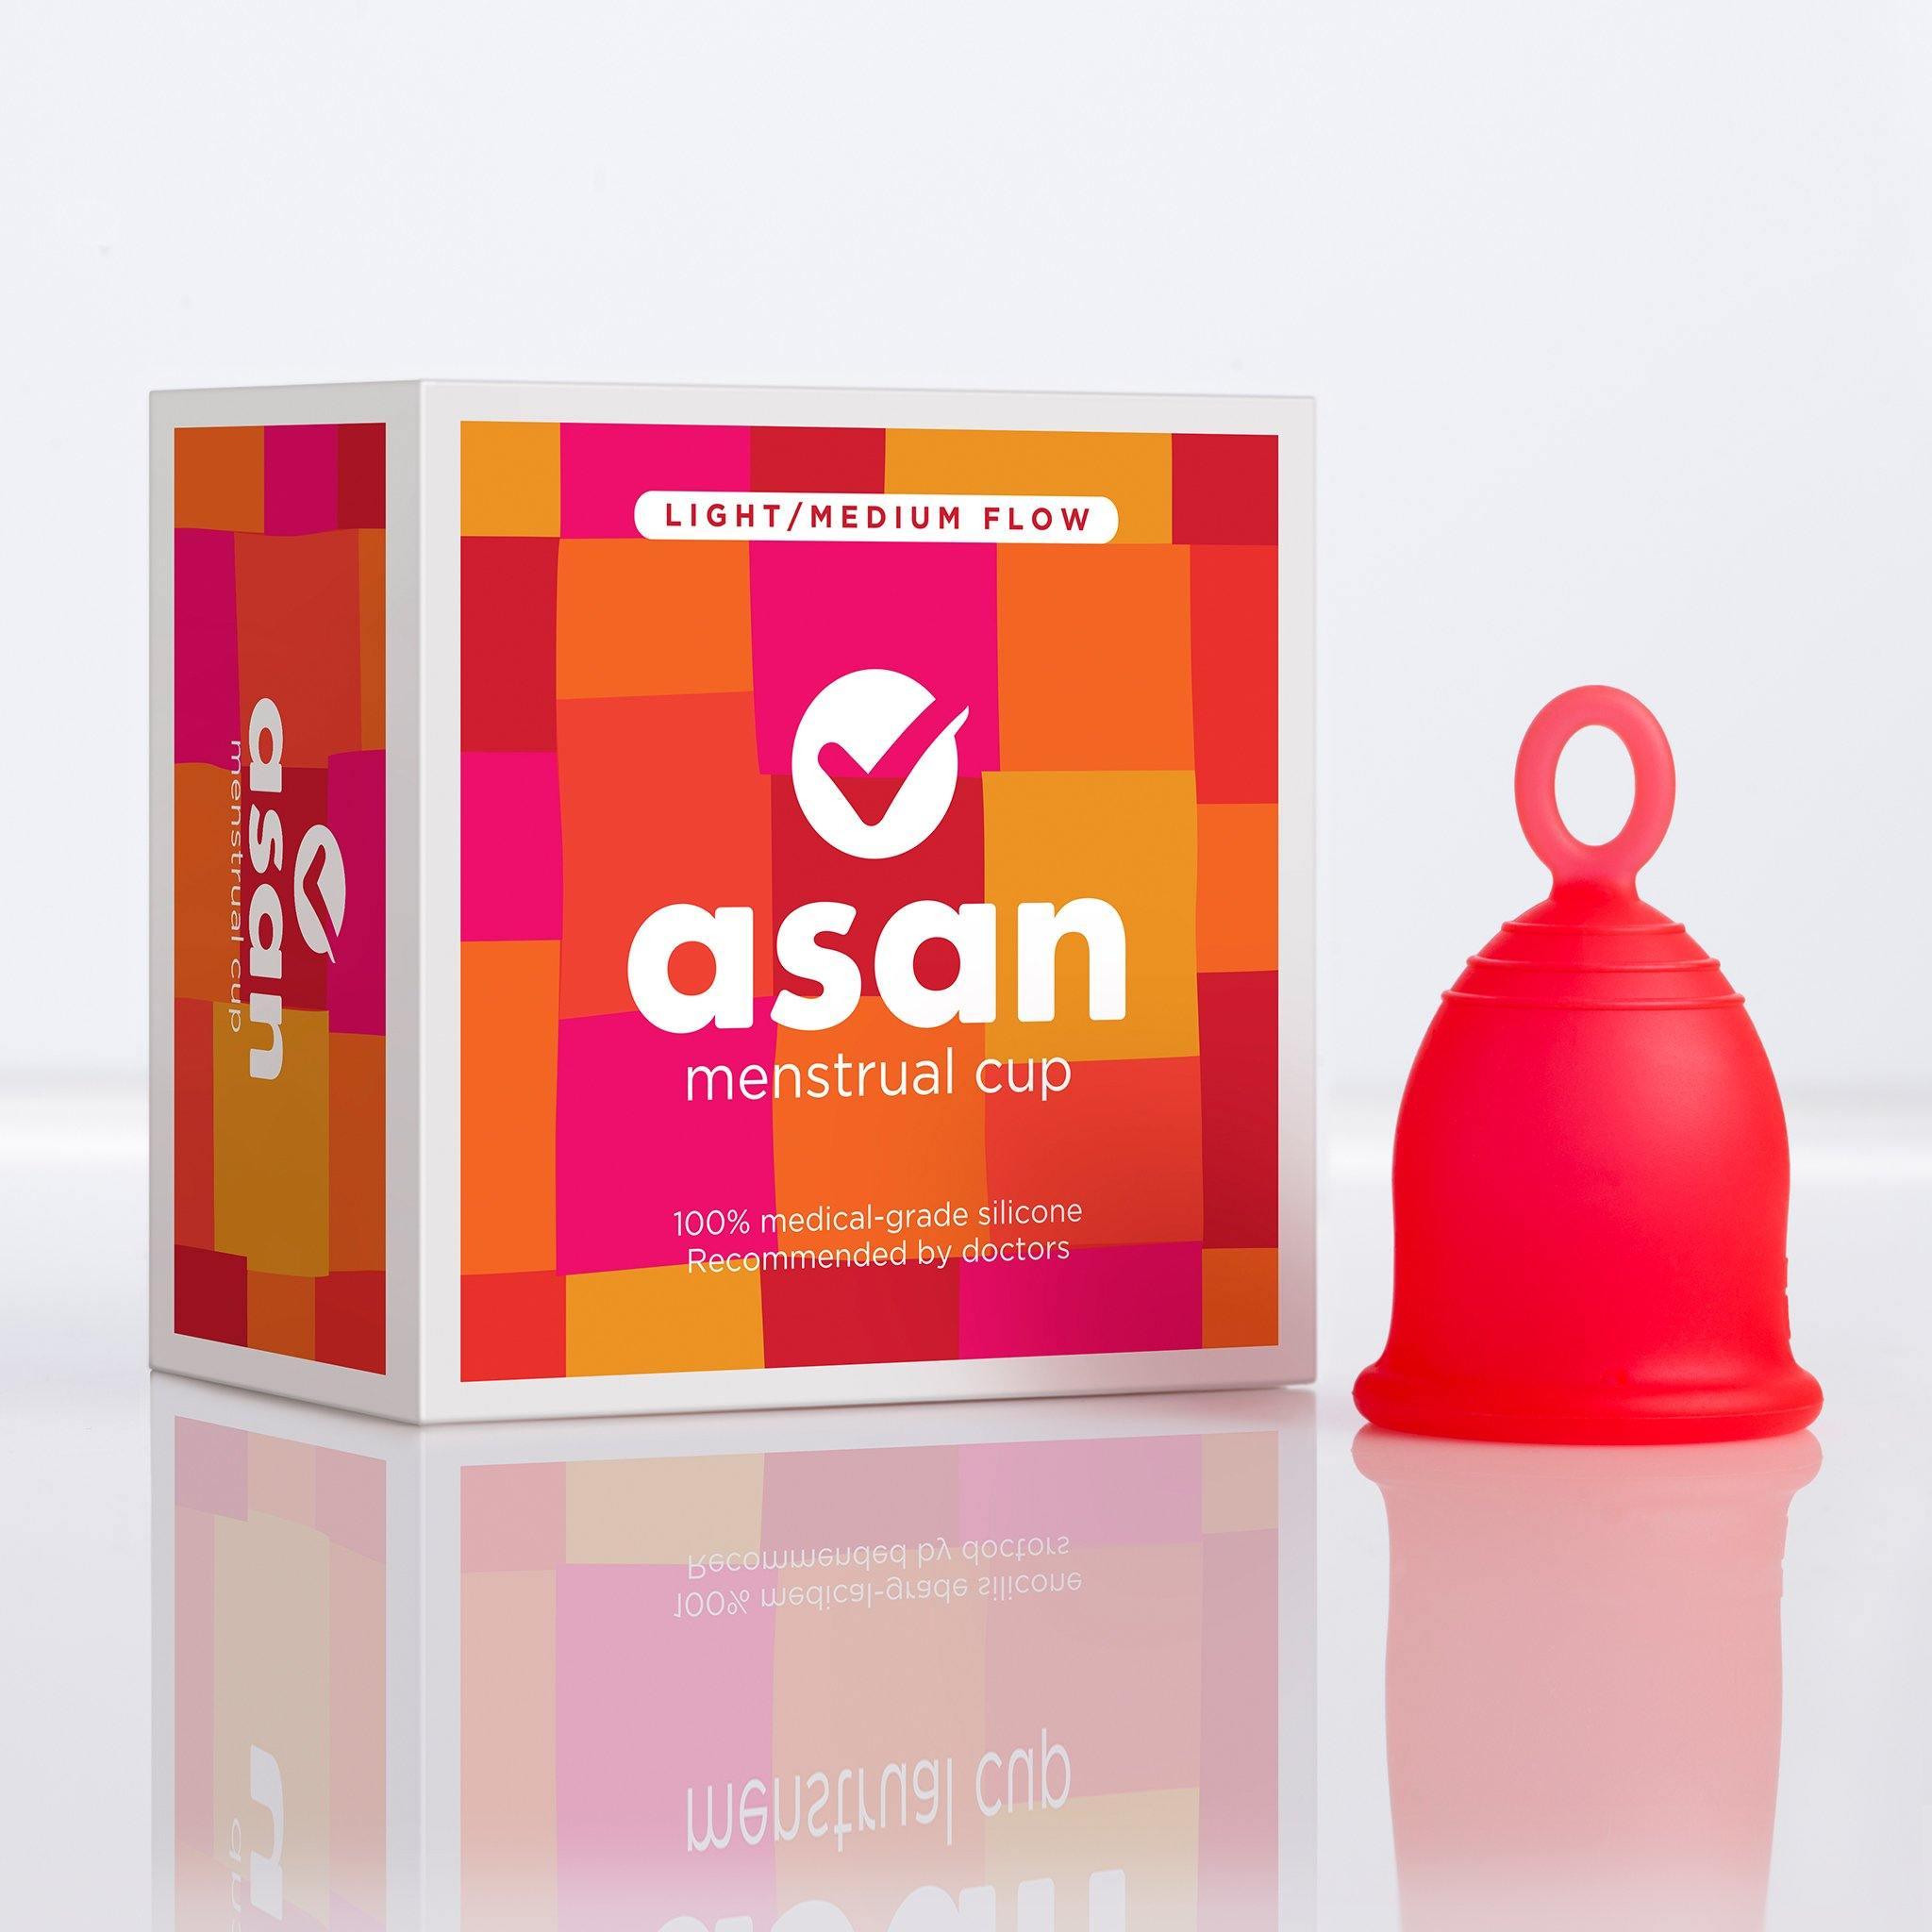 Product picture of asan menstrual cup